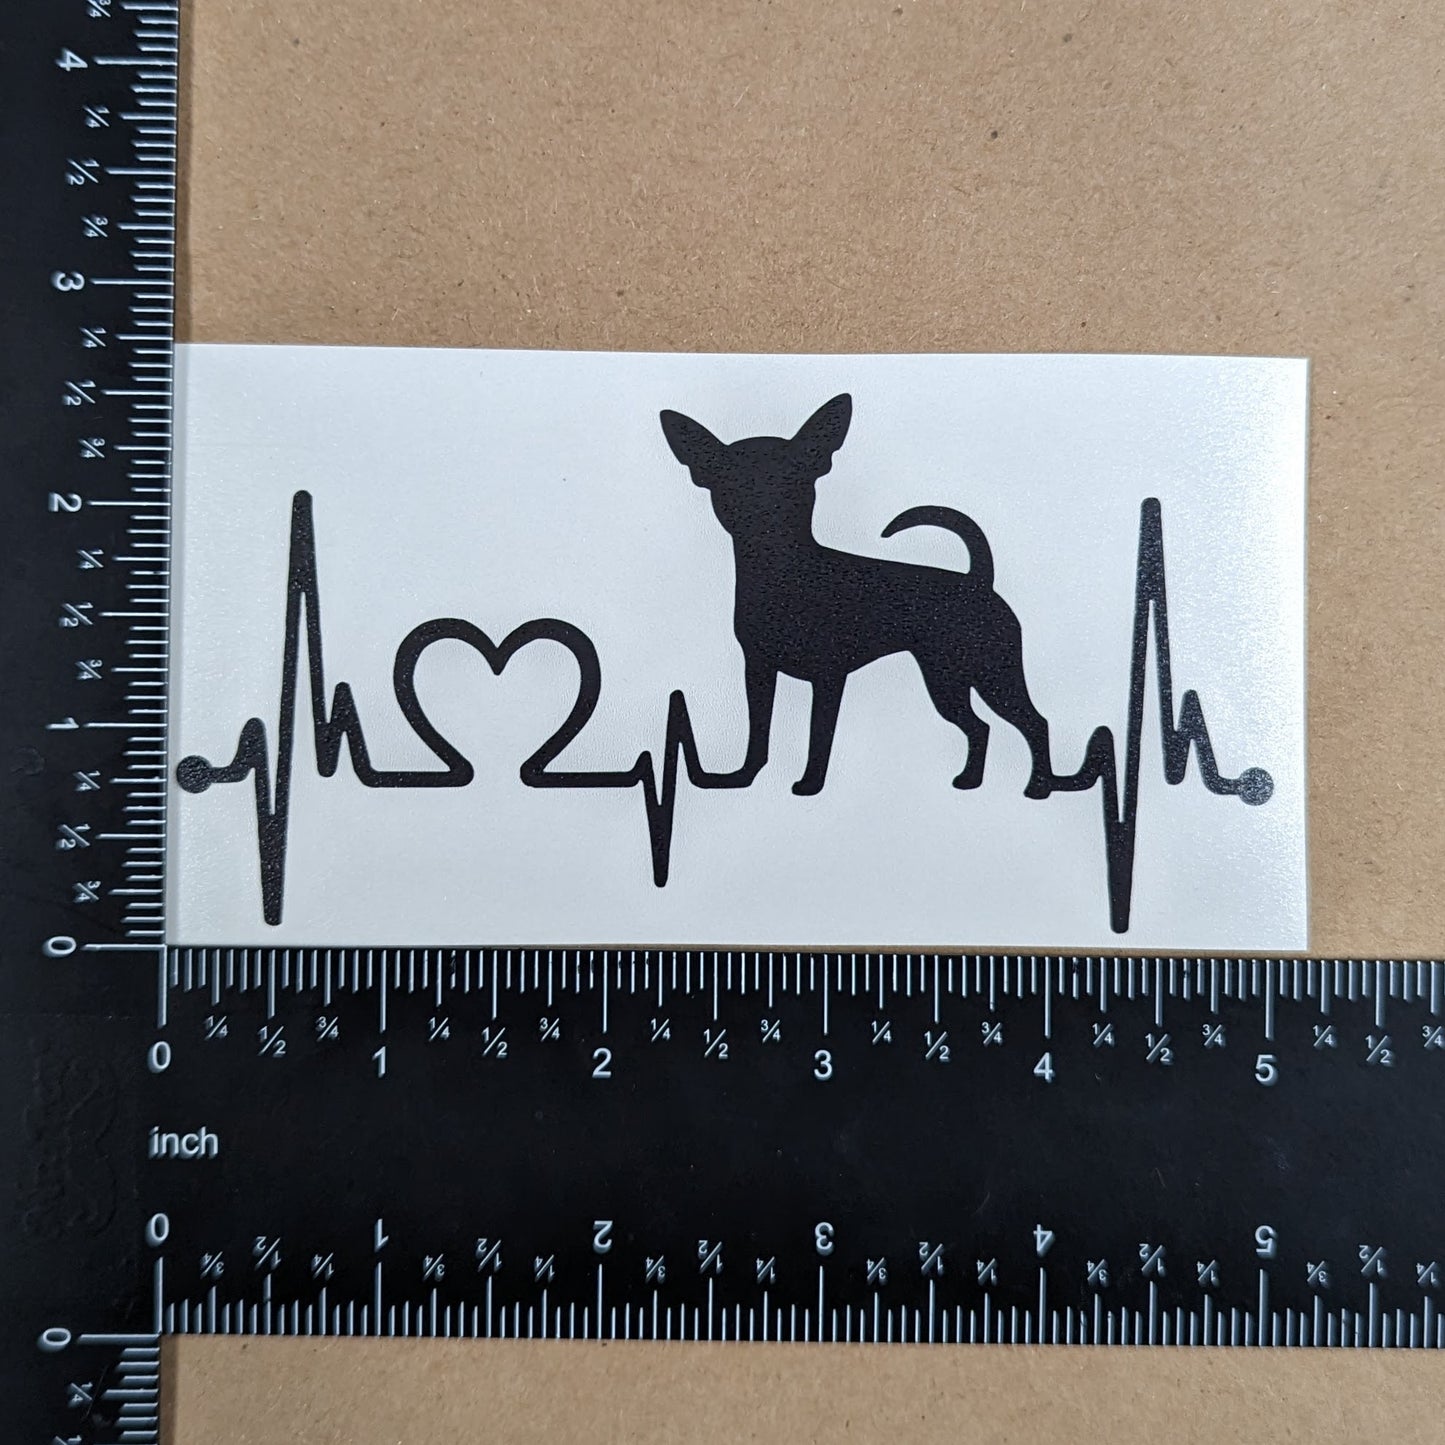 Chihuahua Decal 4 Pack